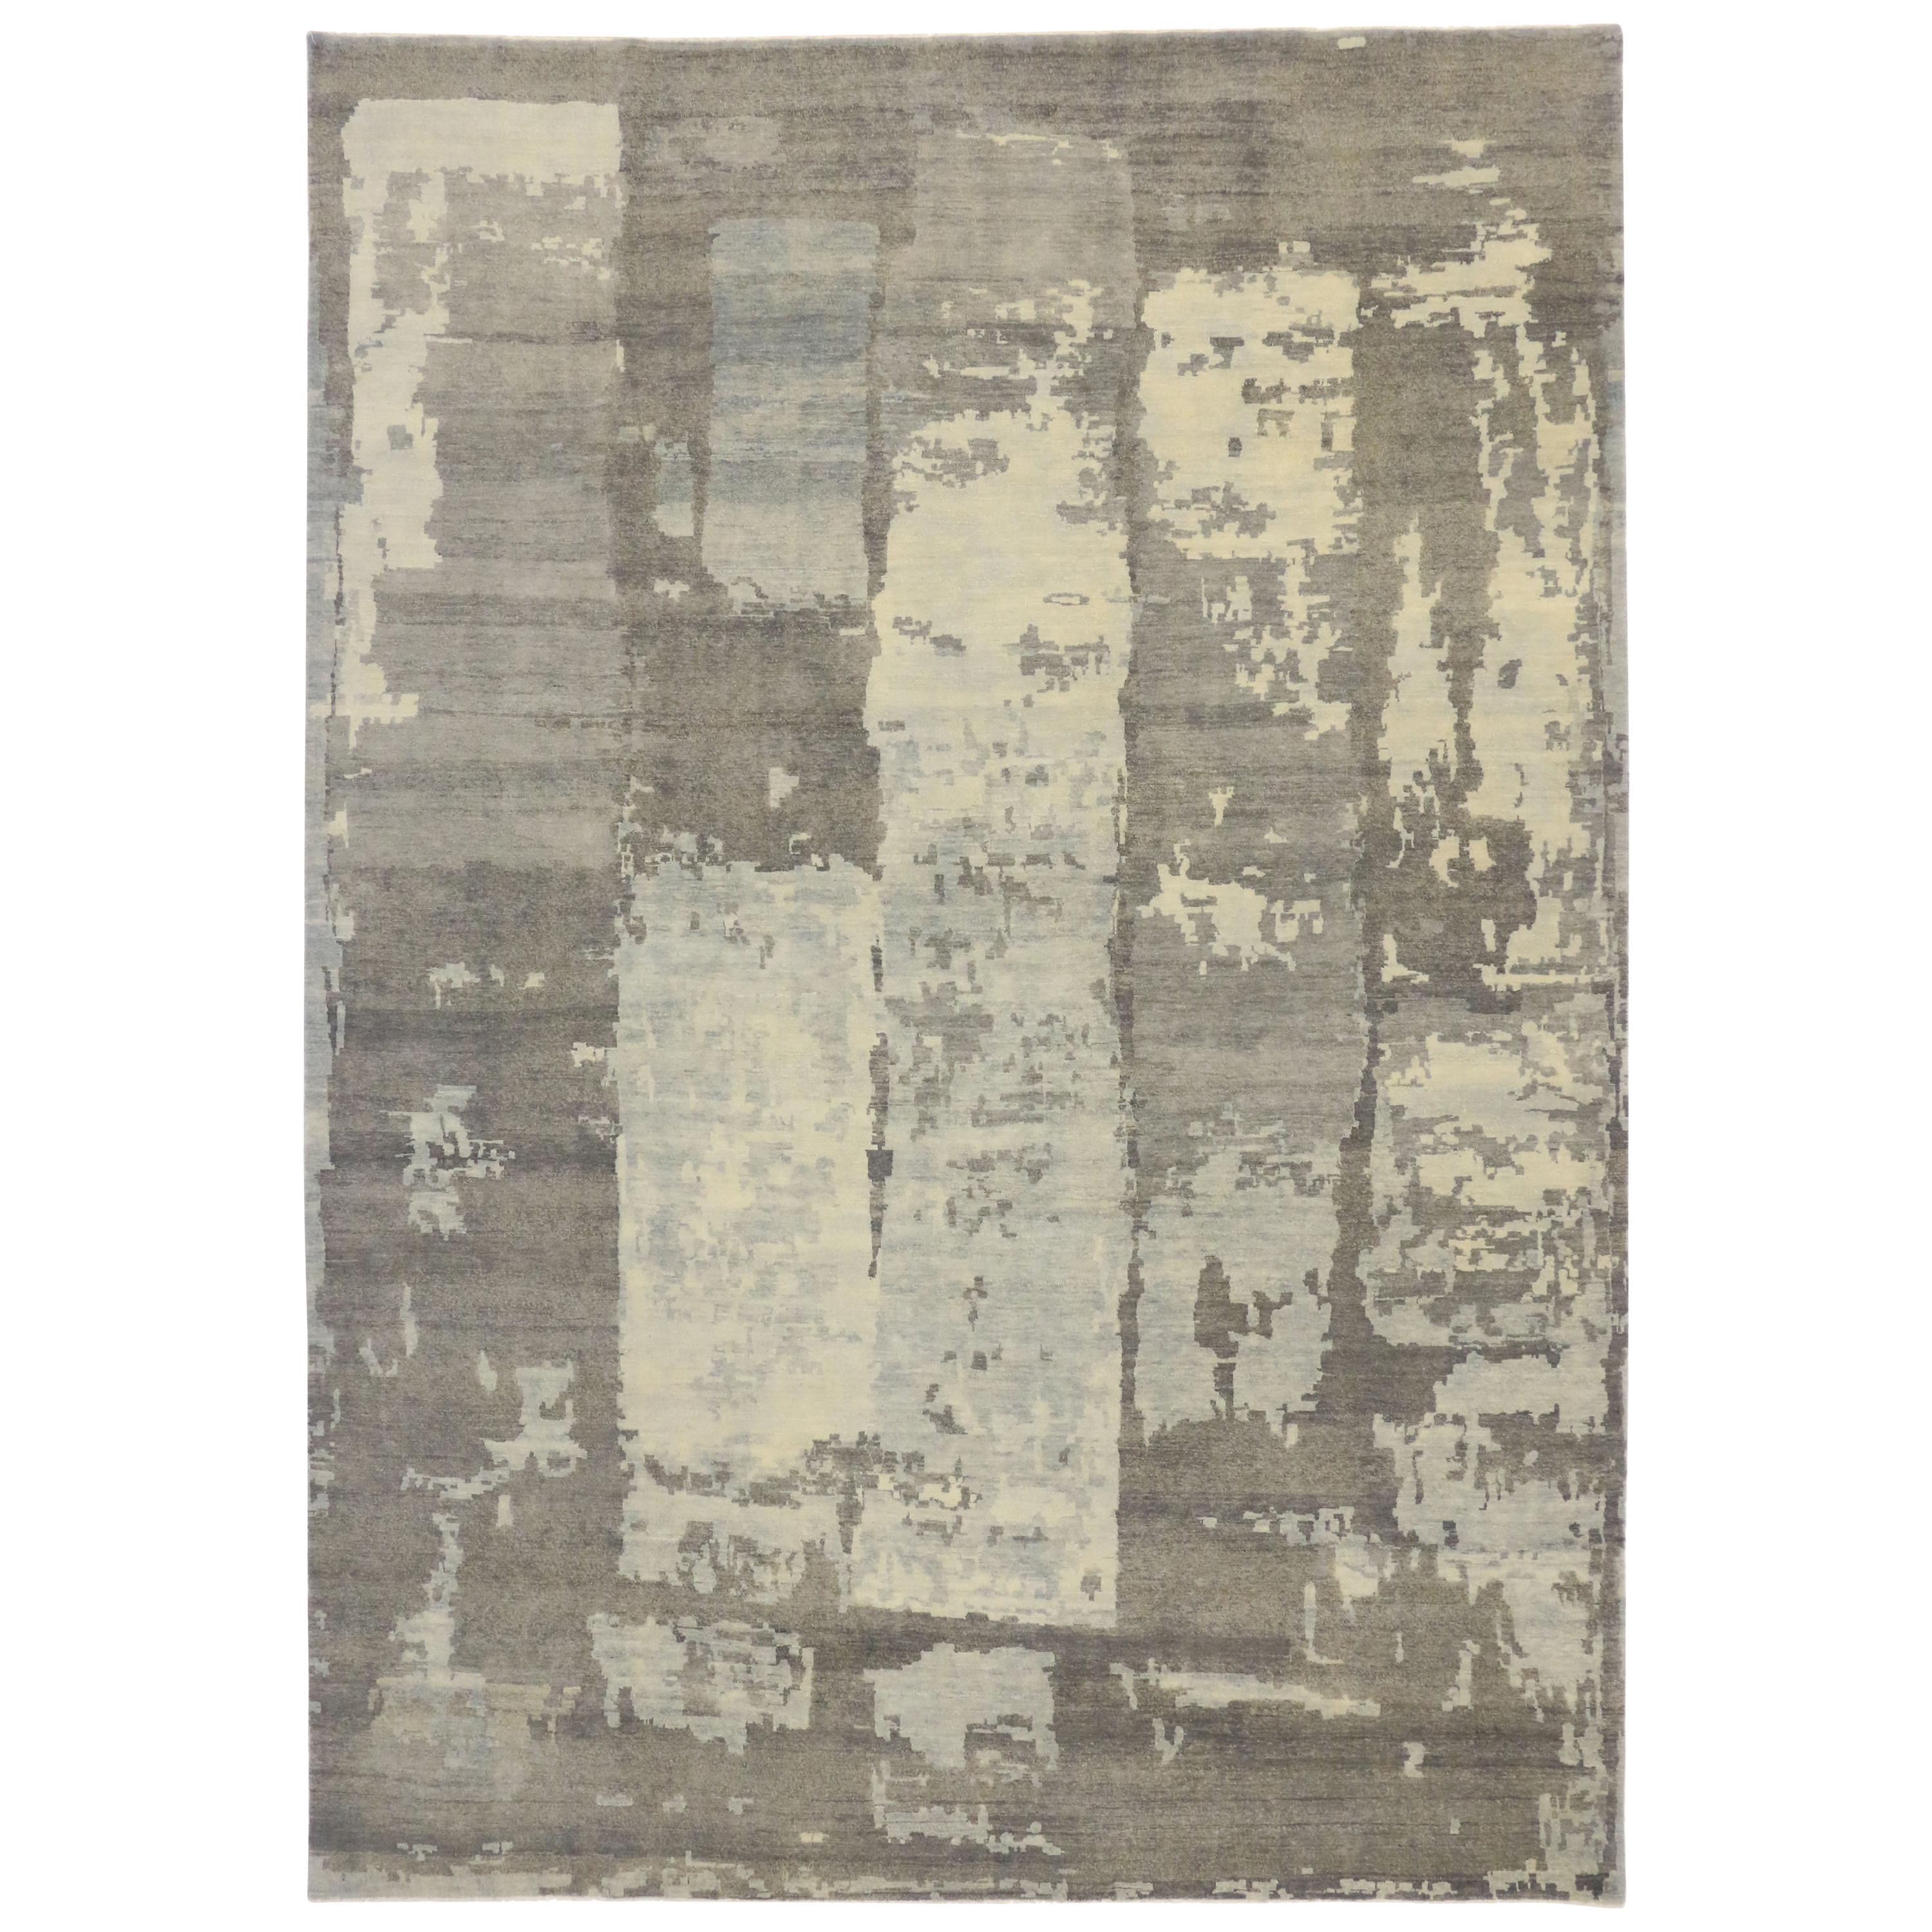 New Contemporary Area Rug with Abstract Expressionist Paint Brush Strokes